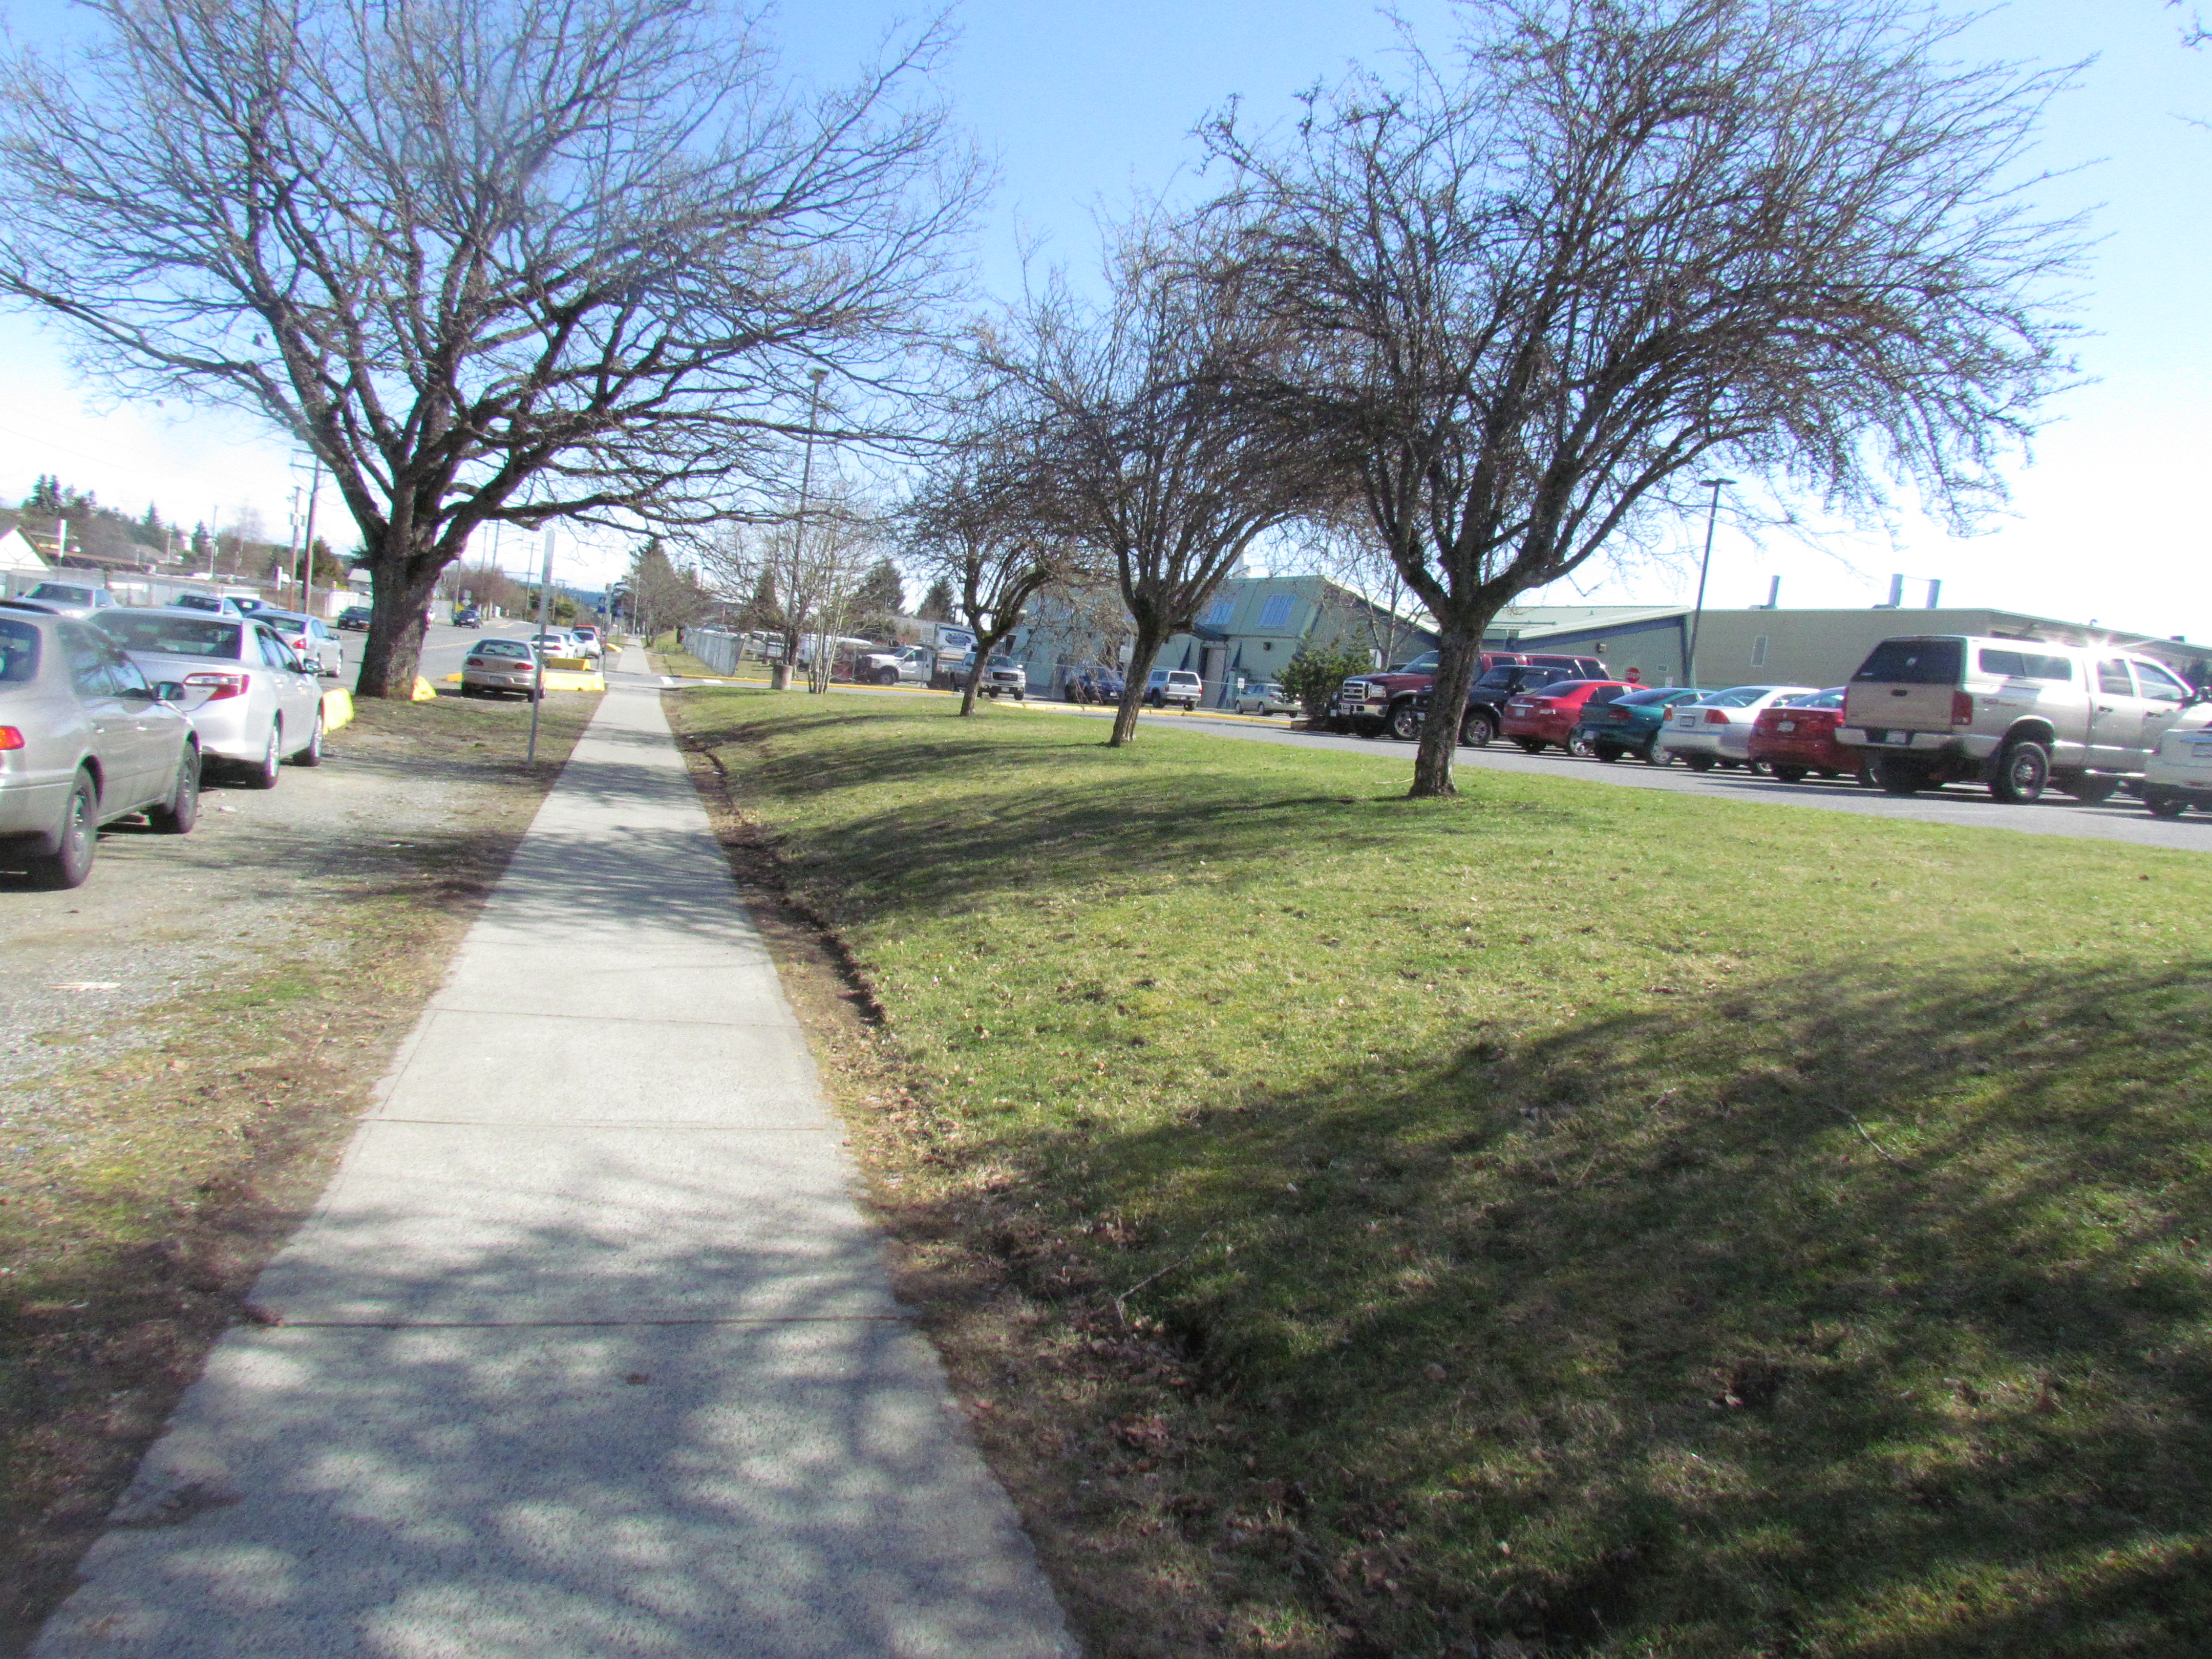 A sidewalk leads away from the camera, with cars parked along the left hand side along the street and a full parking lot on the right.